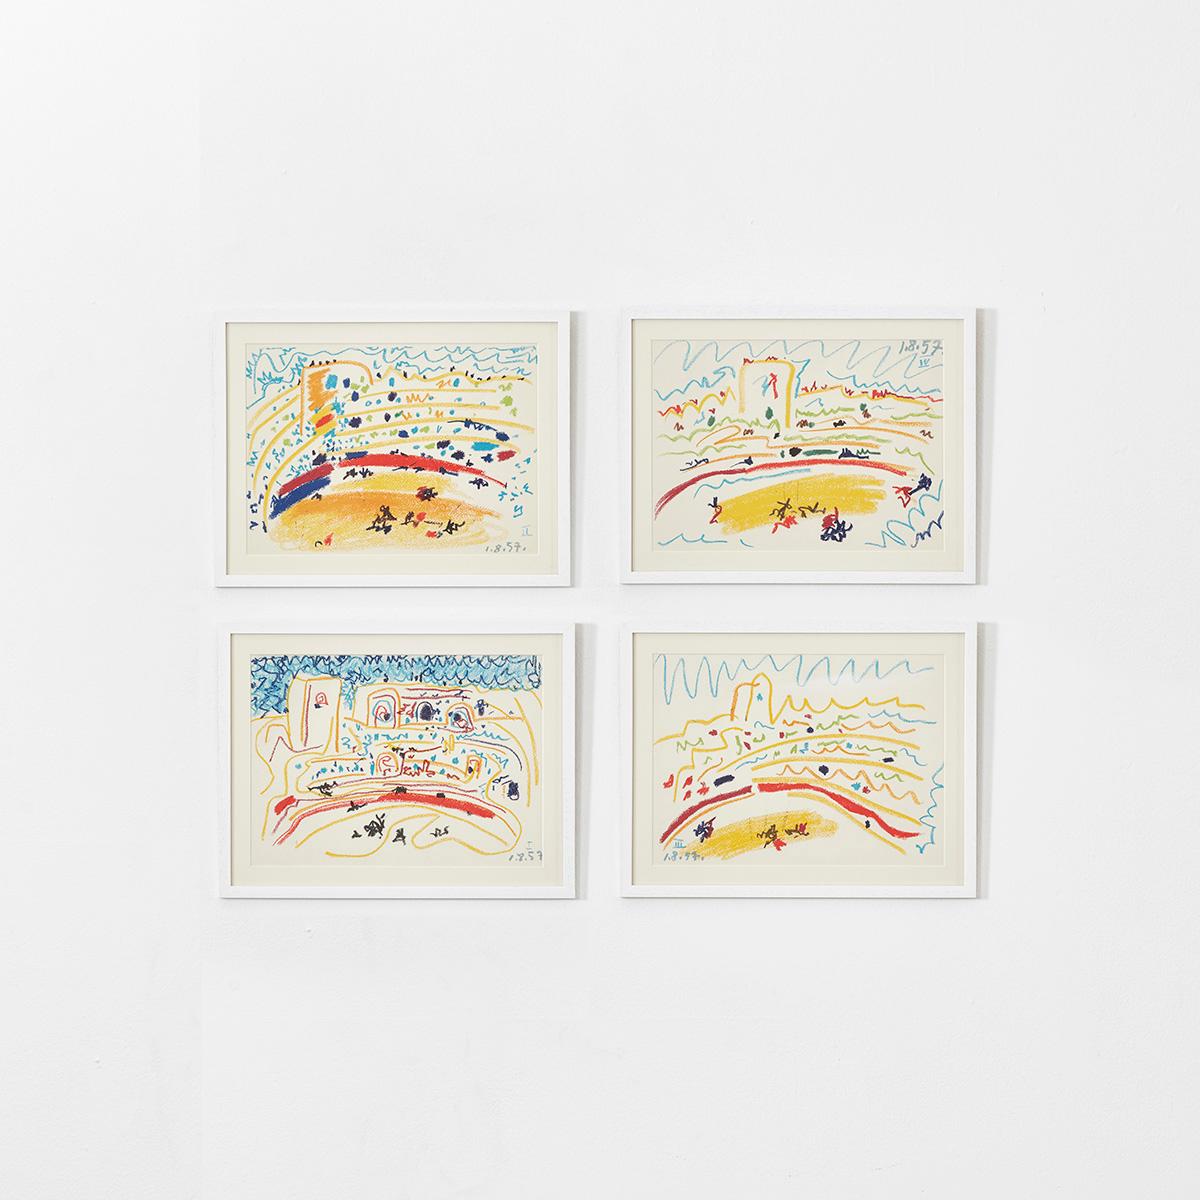 Bullfighting was a subject that Picasso perpetually returned to throughout his career. In these four lithographs, he observes the fight from above, the combatants and their aggressions reduced to a minuscule scale.